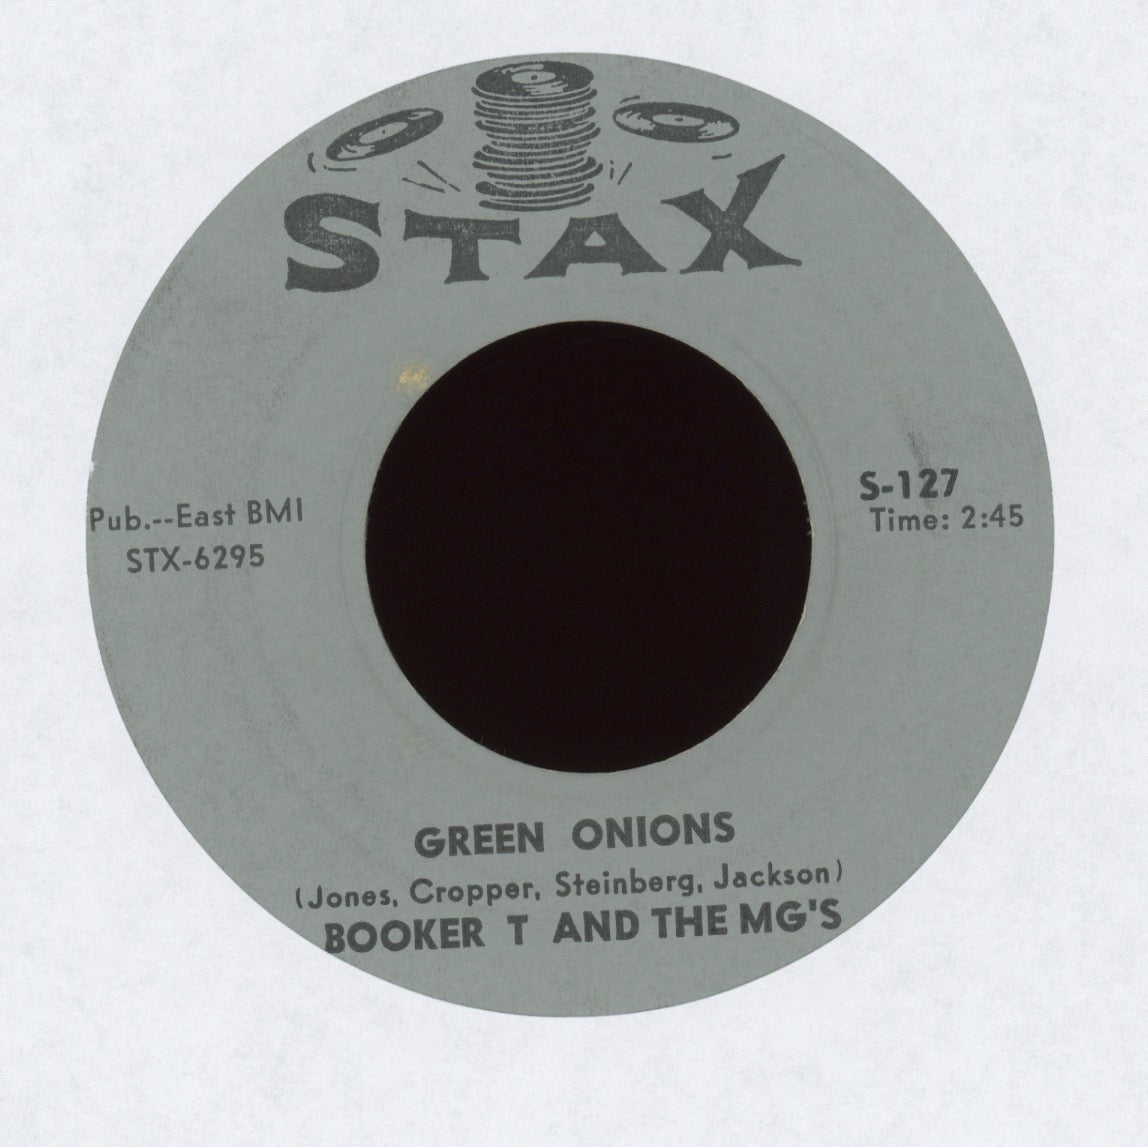 Booker T & The MG's - Green Onions on Stax